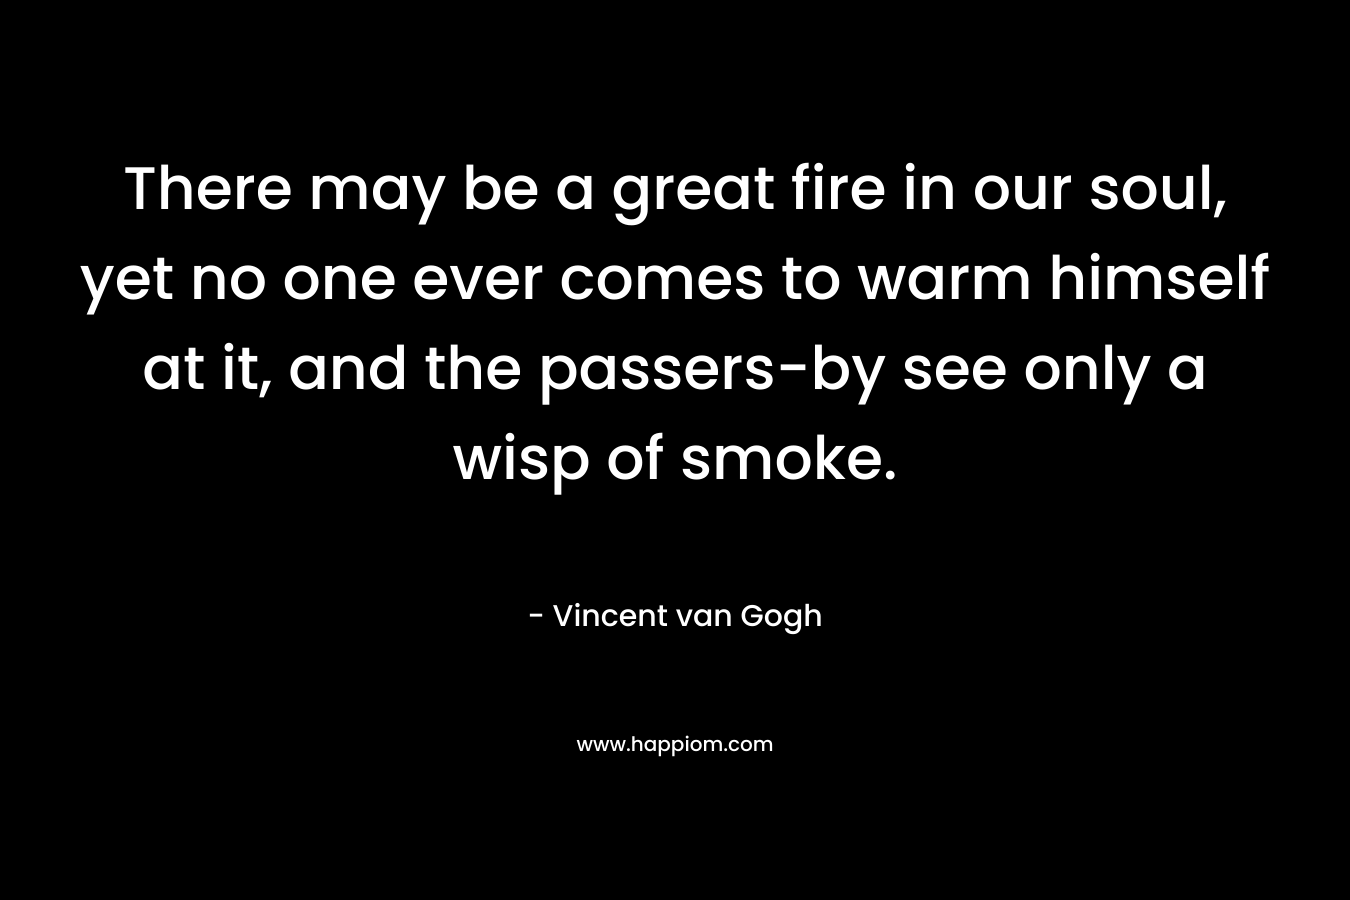 There may be a great fire in our soul, yet no one ever comes to warm himself at it, and the passers-by see only a wisp of smoke.